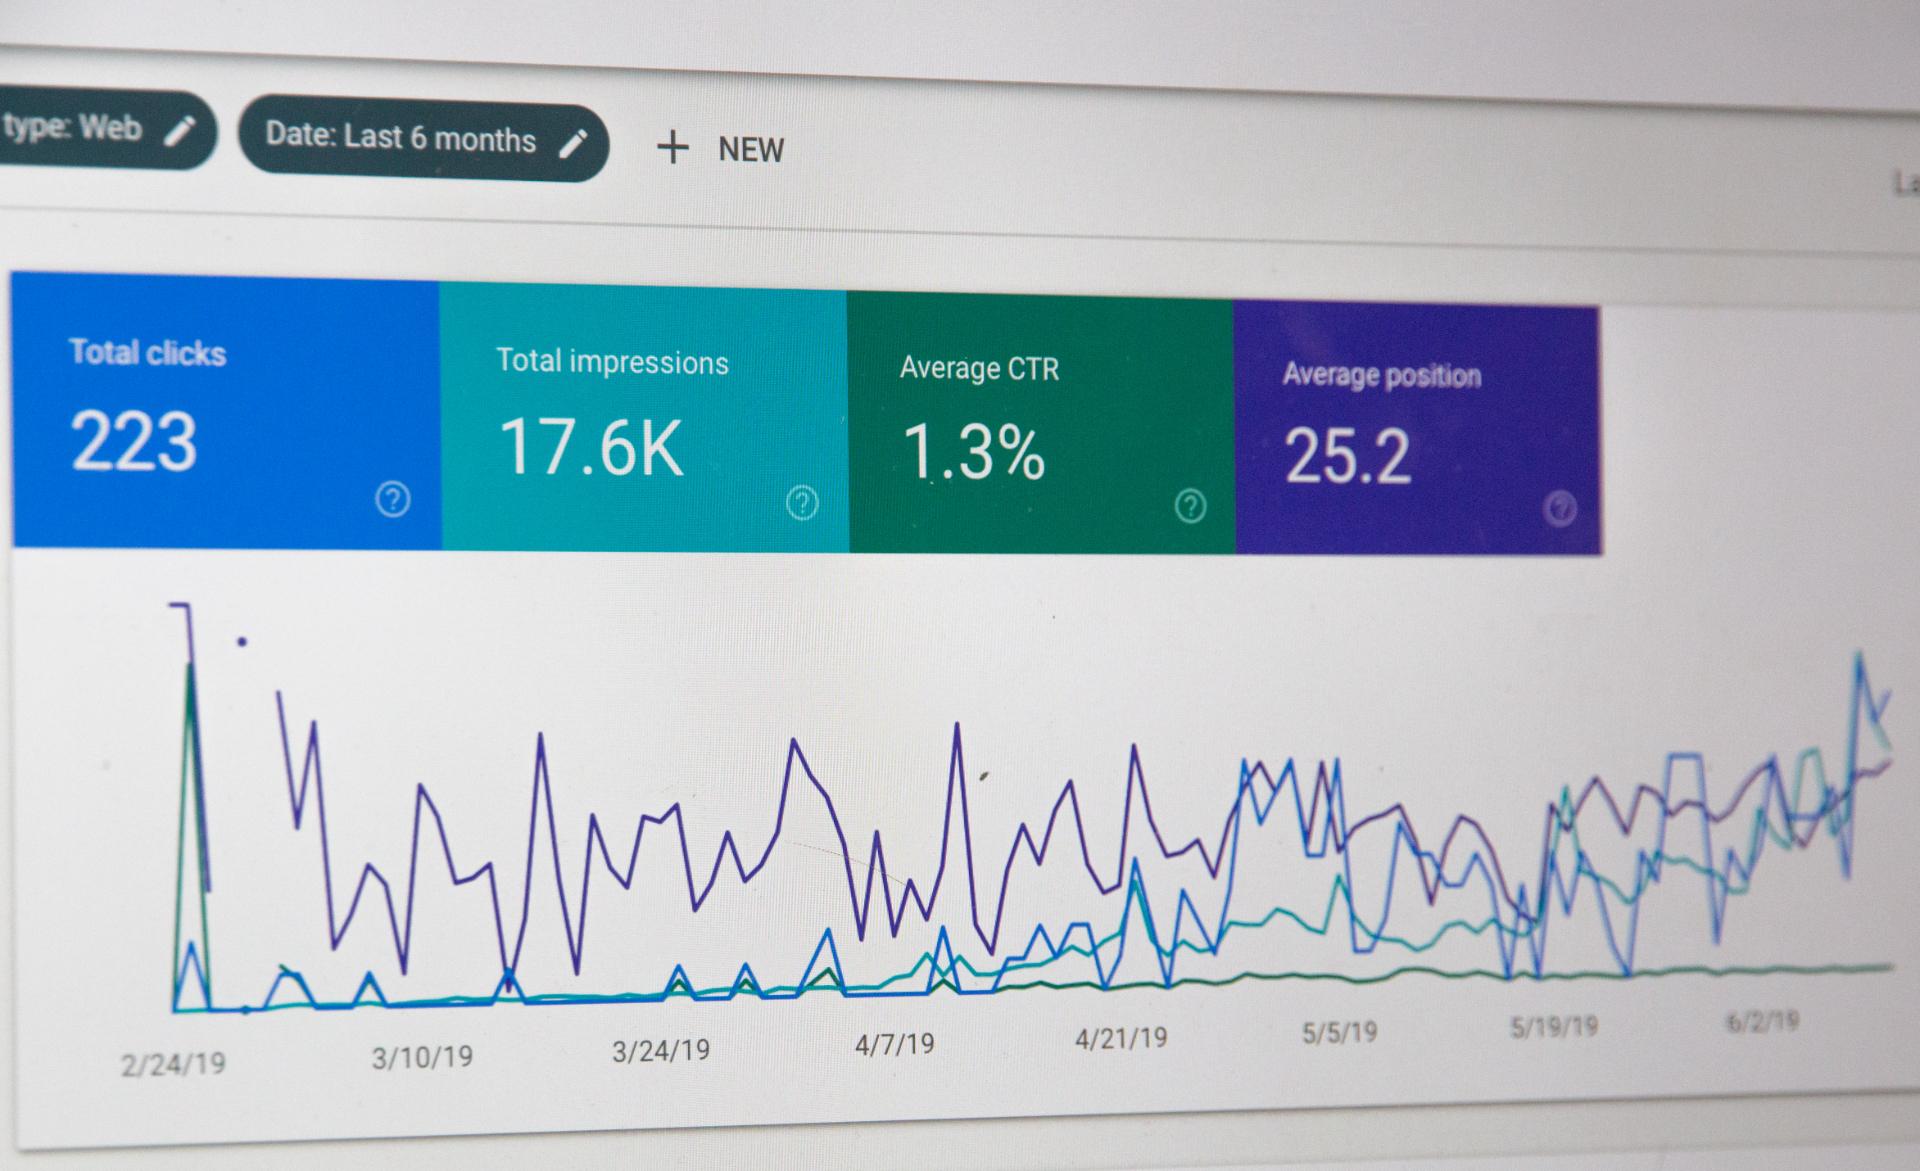 Growing traffic on Google search console